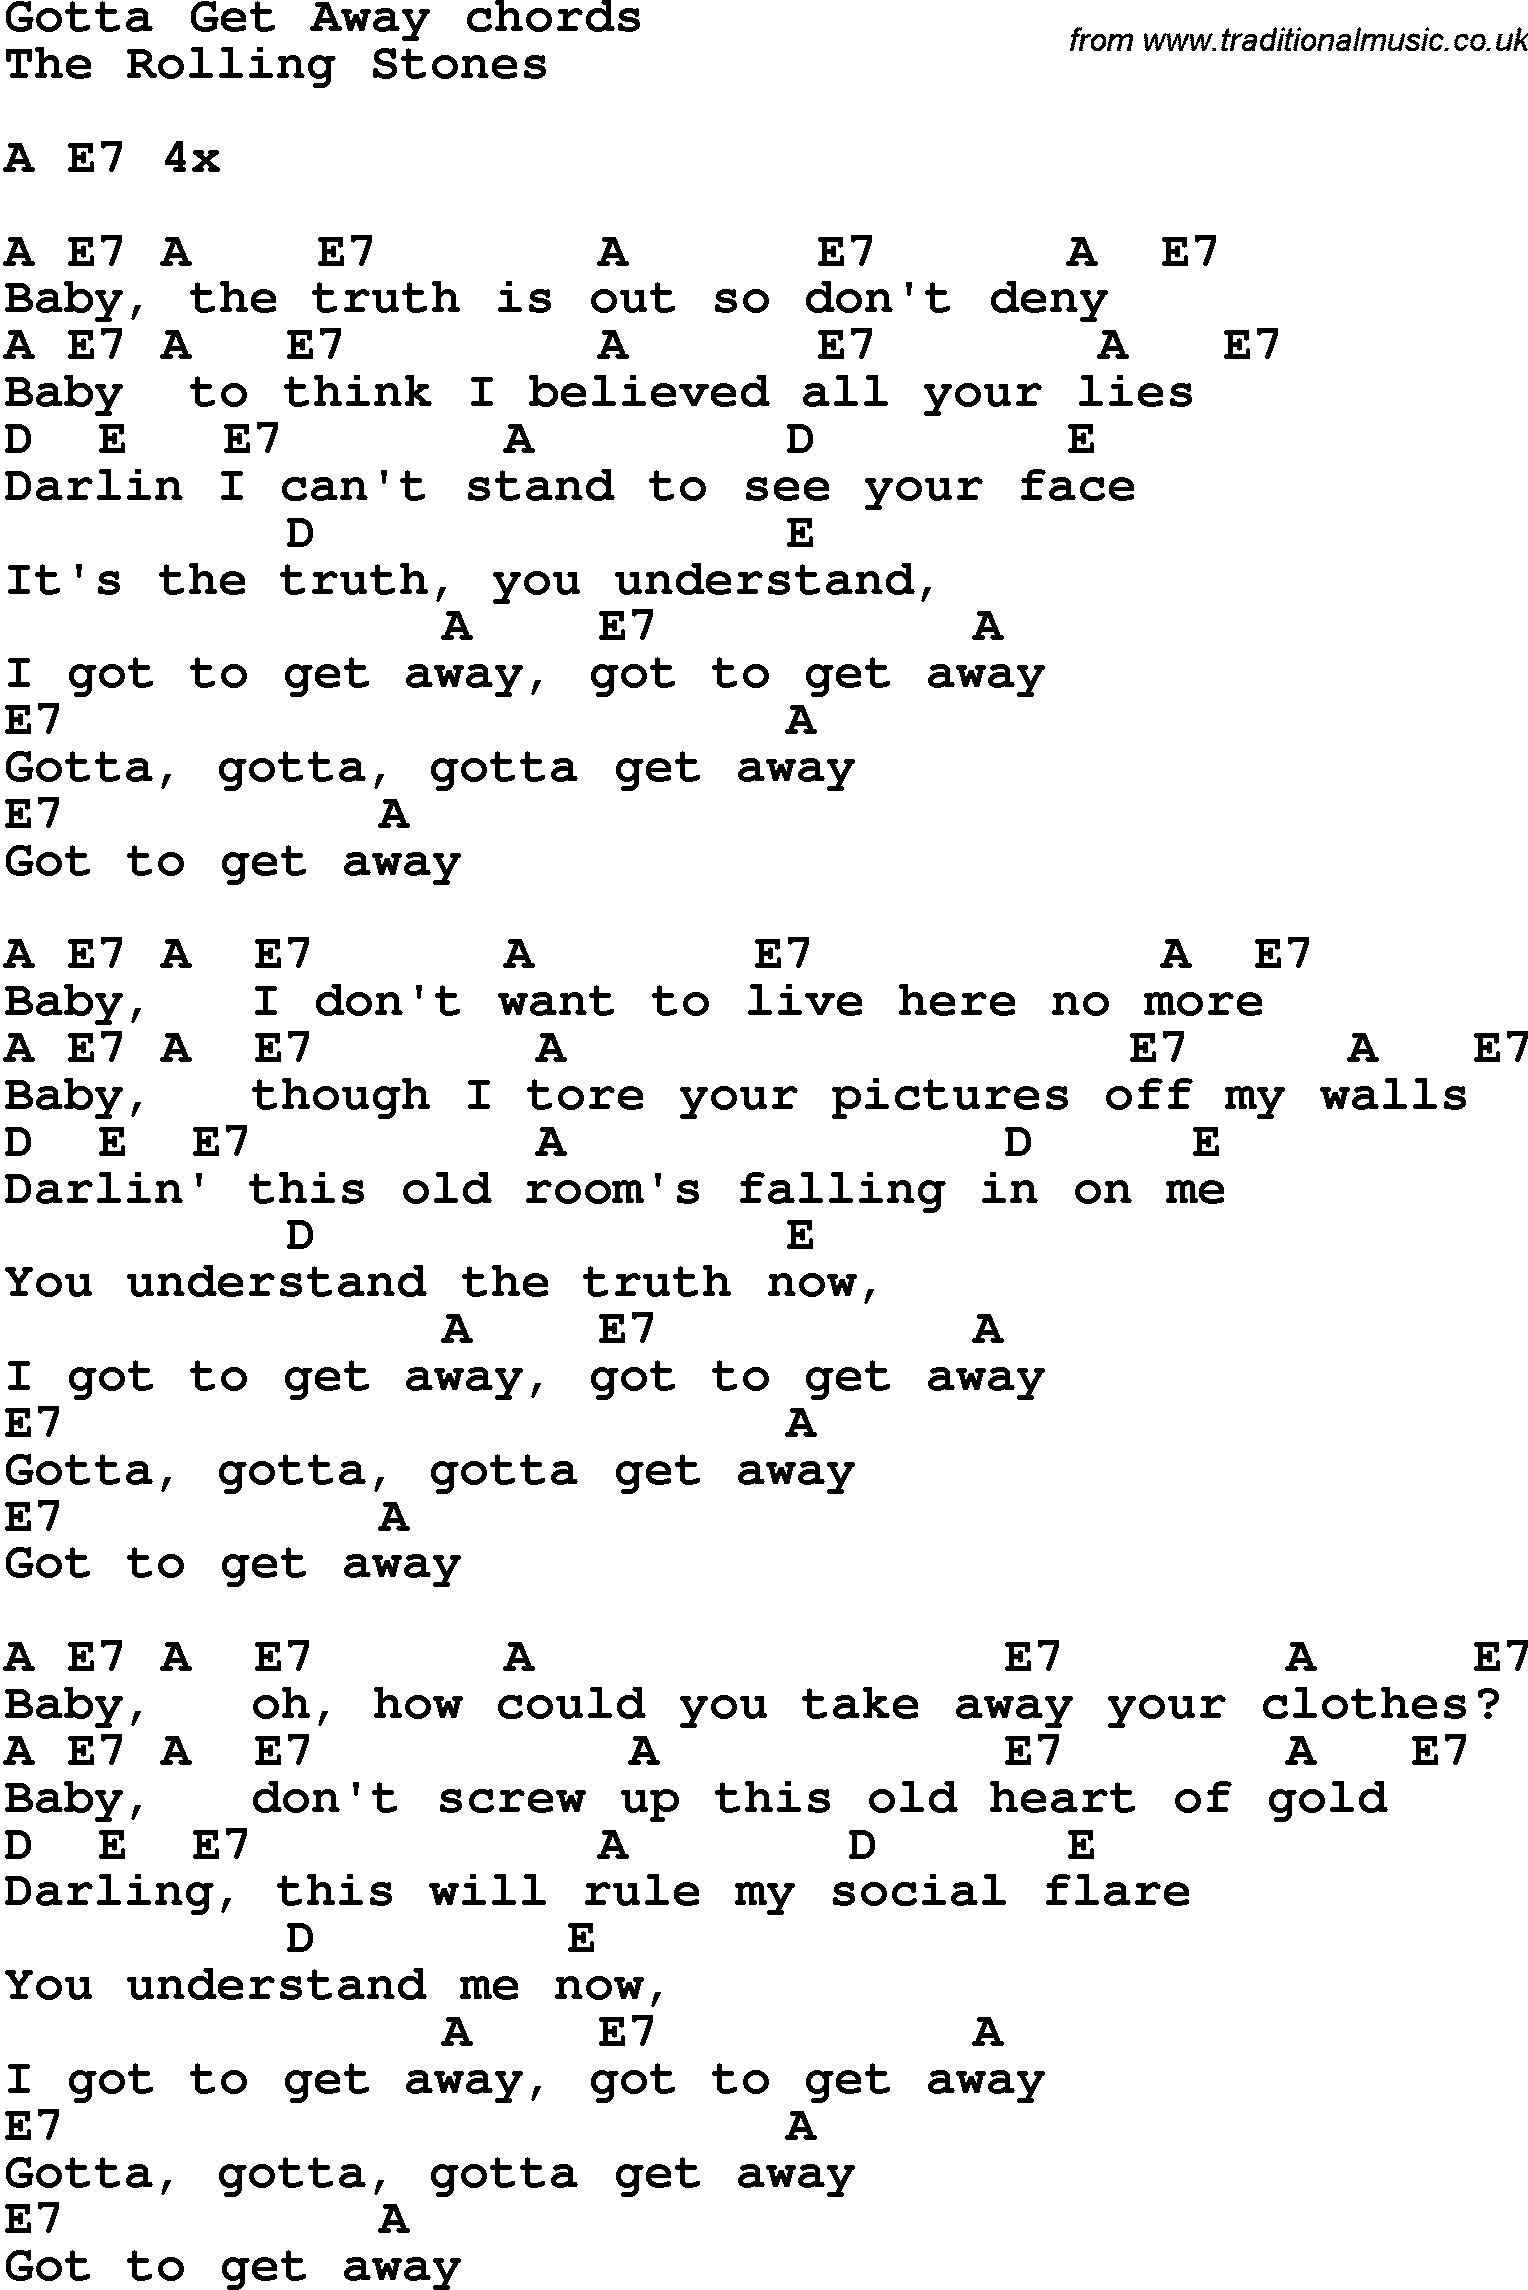 Song Lyrics with guitar chords for Gotta Get Away